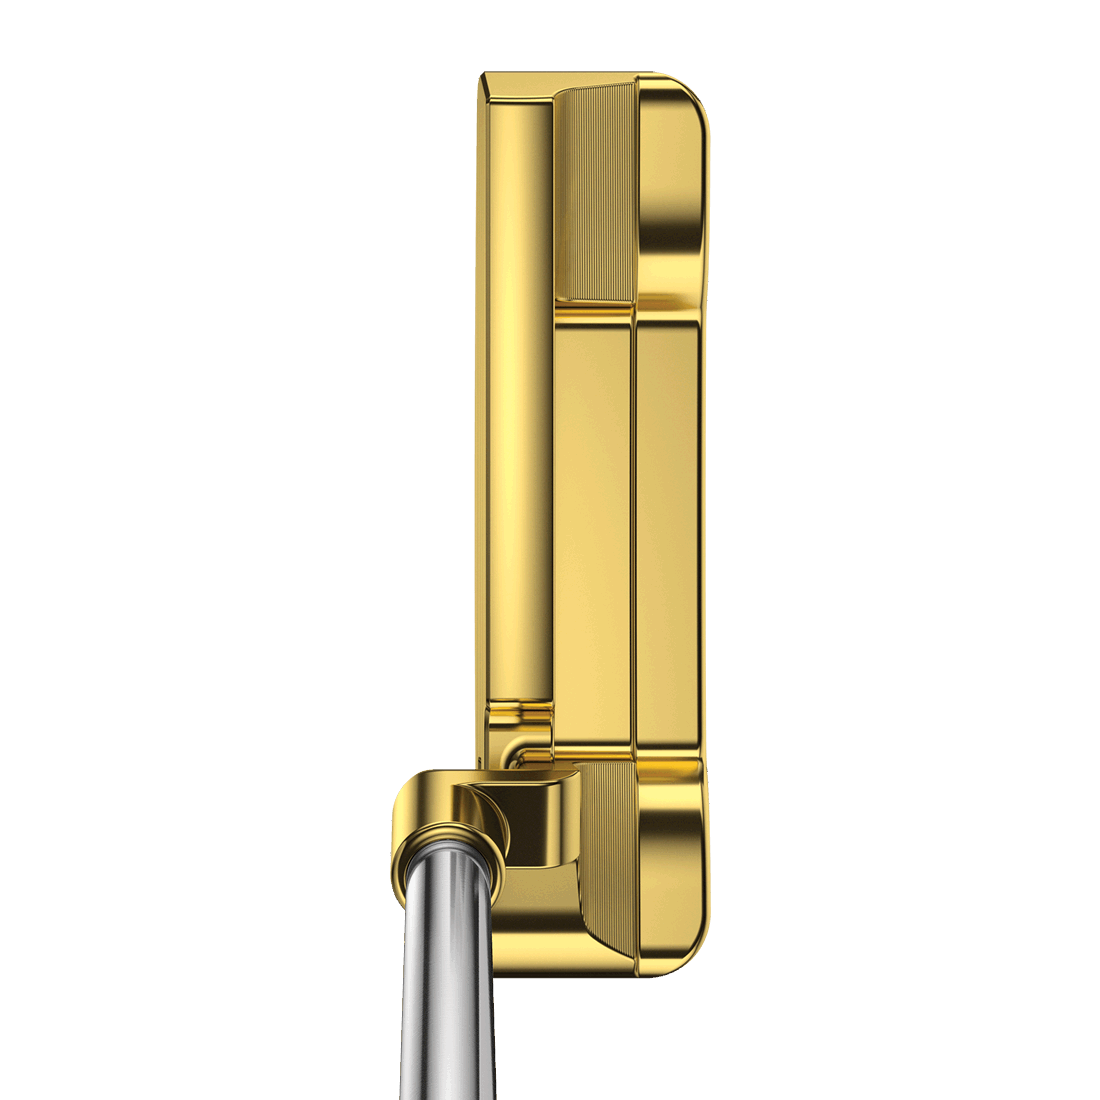 address view of PLD Limited Anser Patent 55 putter in stainless steel with gold-plated finish